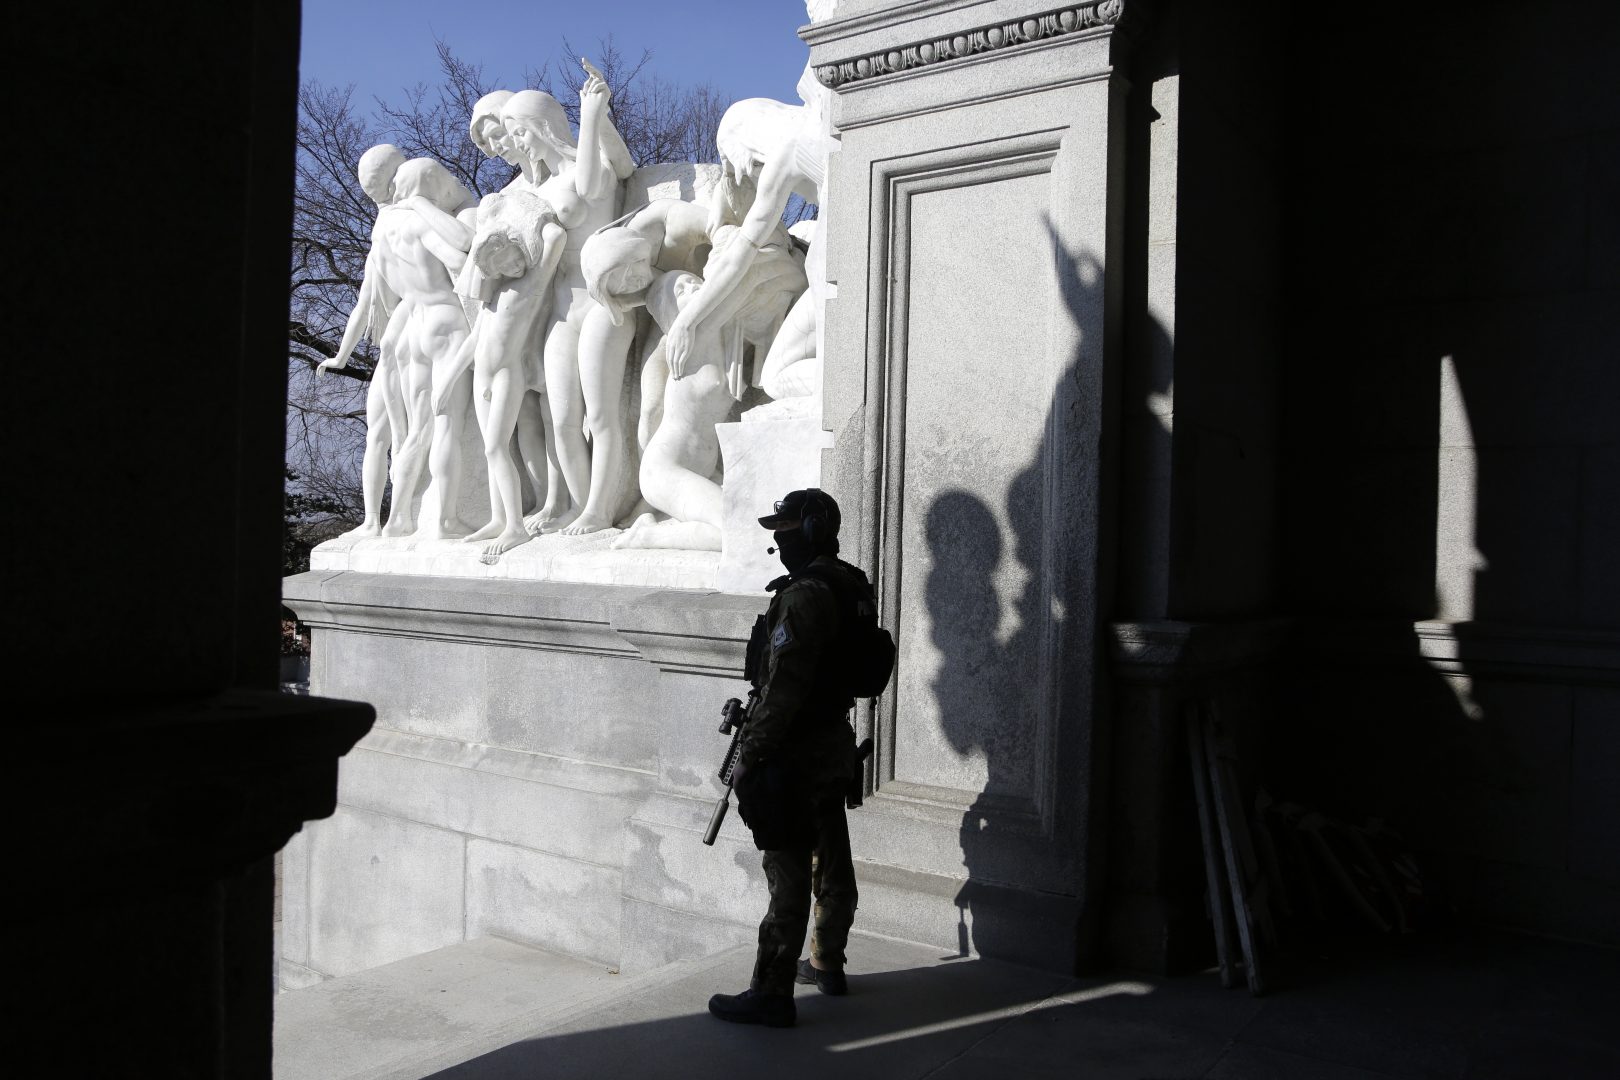 A Capitol police officer stands at the front entrance of the Pennsylvania Capitol building Tuesday Jan. 12, 2021,  in Harrisburg, Pa. State capitols across the country are under heightened security after the siege of the U.S. Capitol last week. 